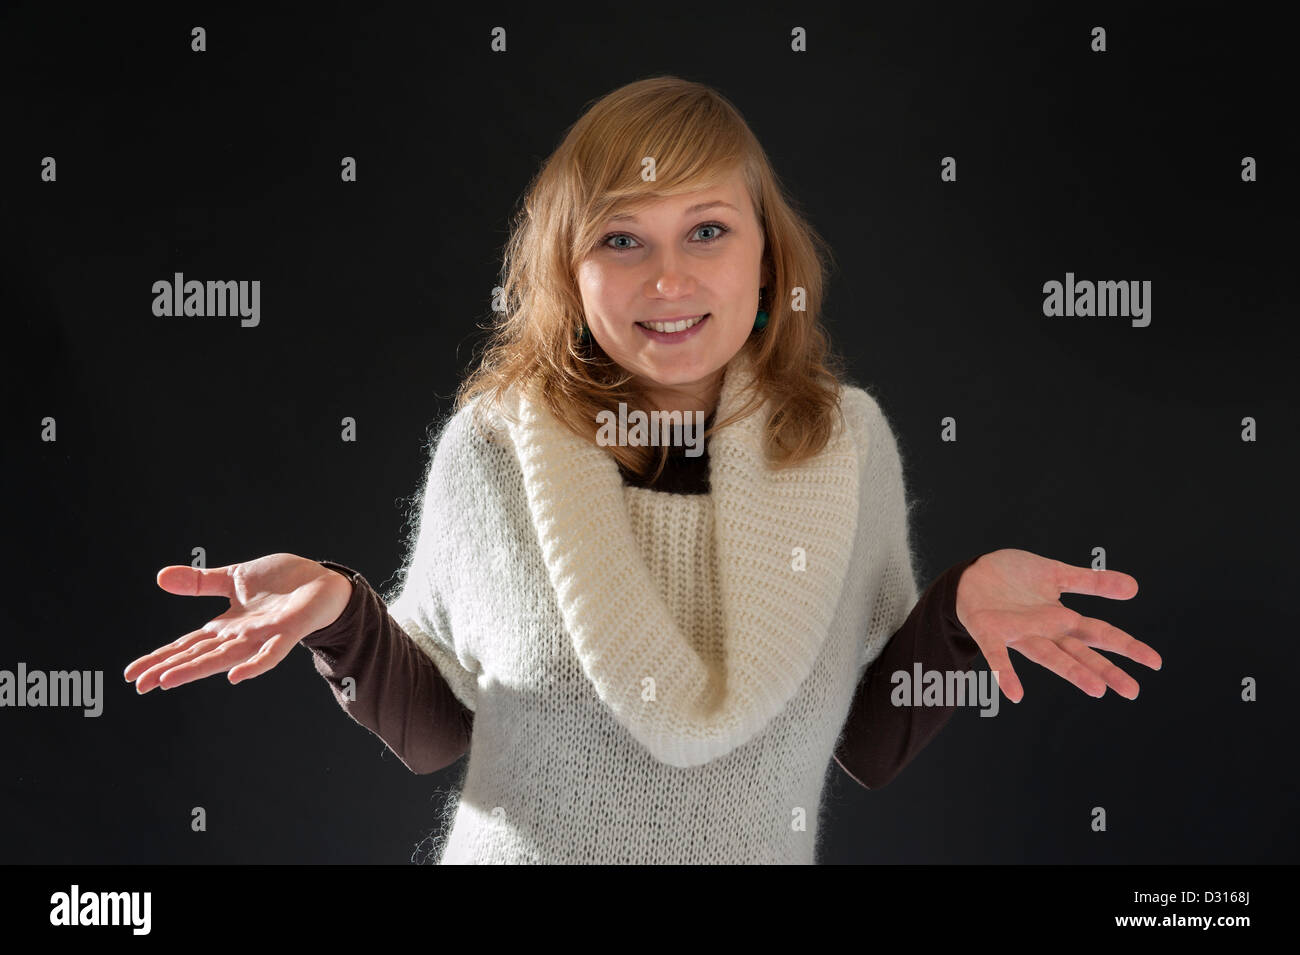 young blond woman doing a helpless gesture Stock Photo